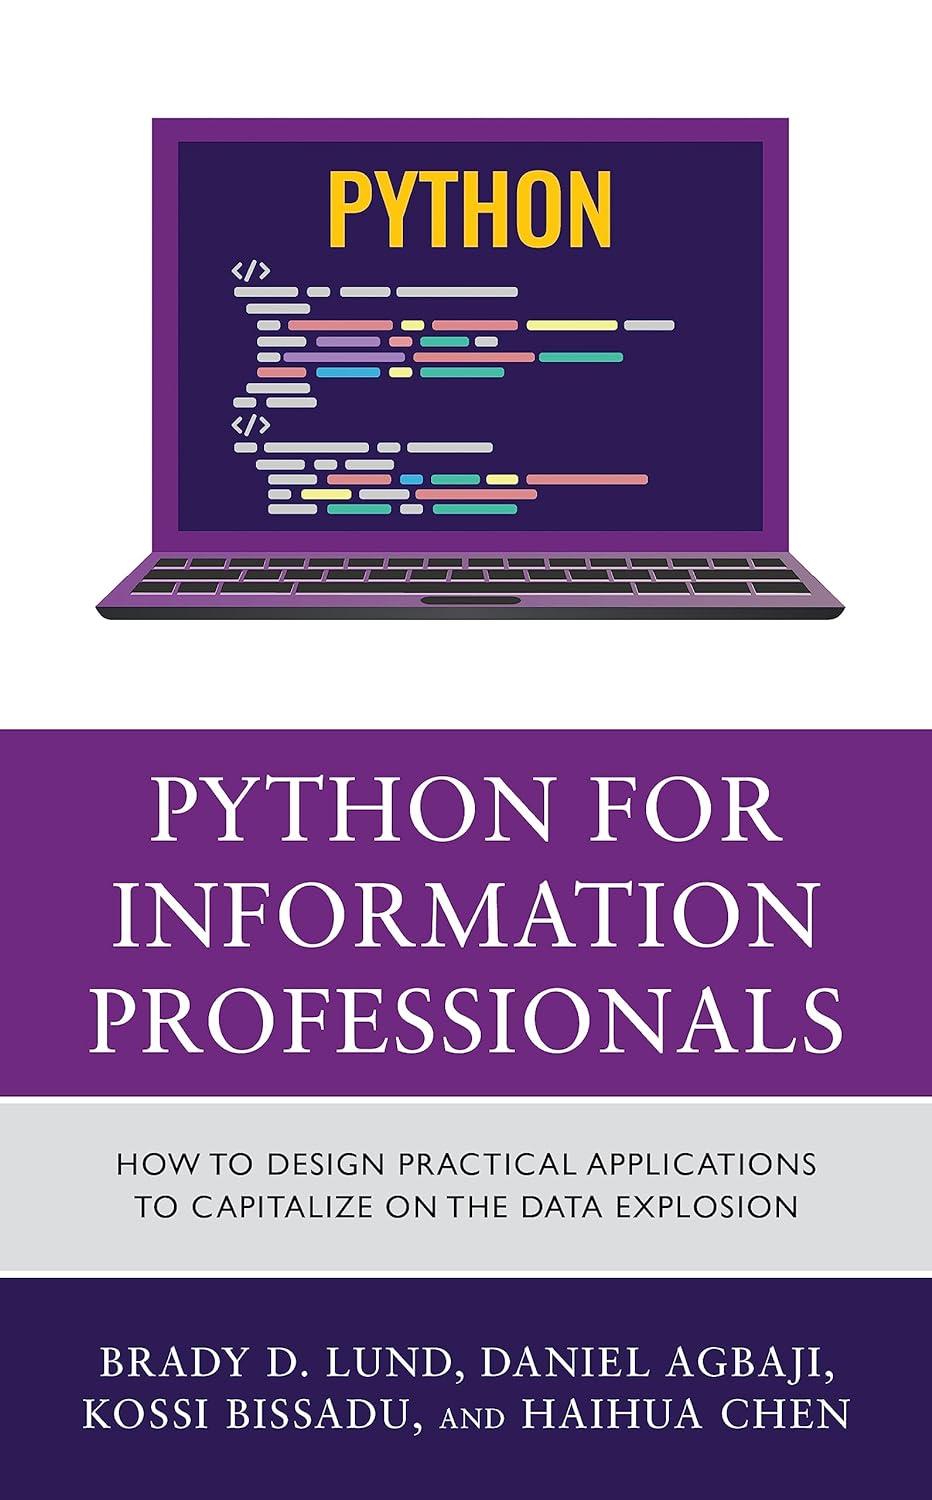 python for information professionals how to design practical applications to capitalize on the data explosion